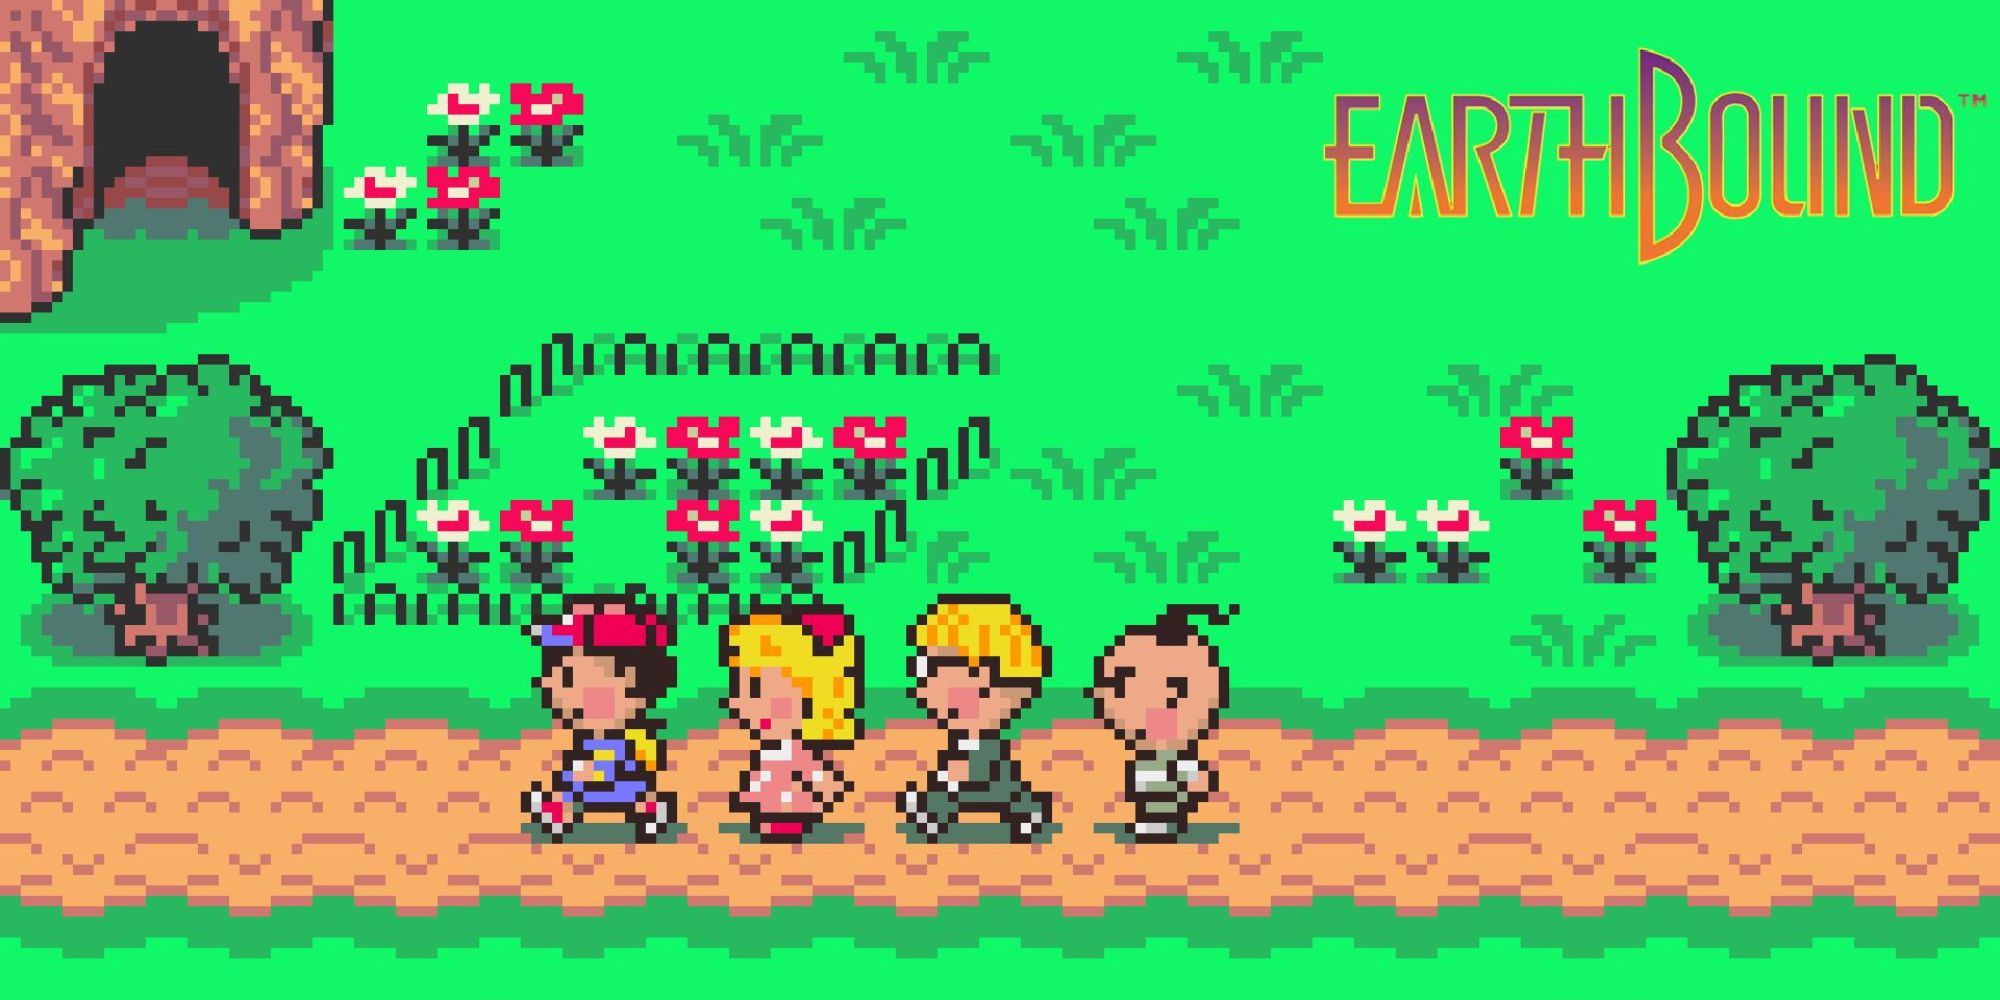 The four main characters of Earthbound walking along a dirt path.